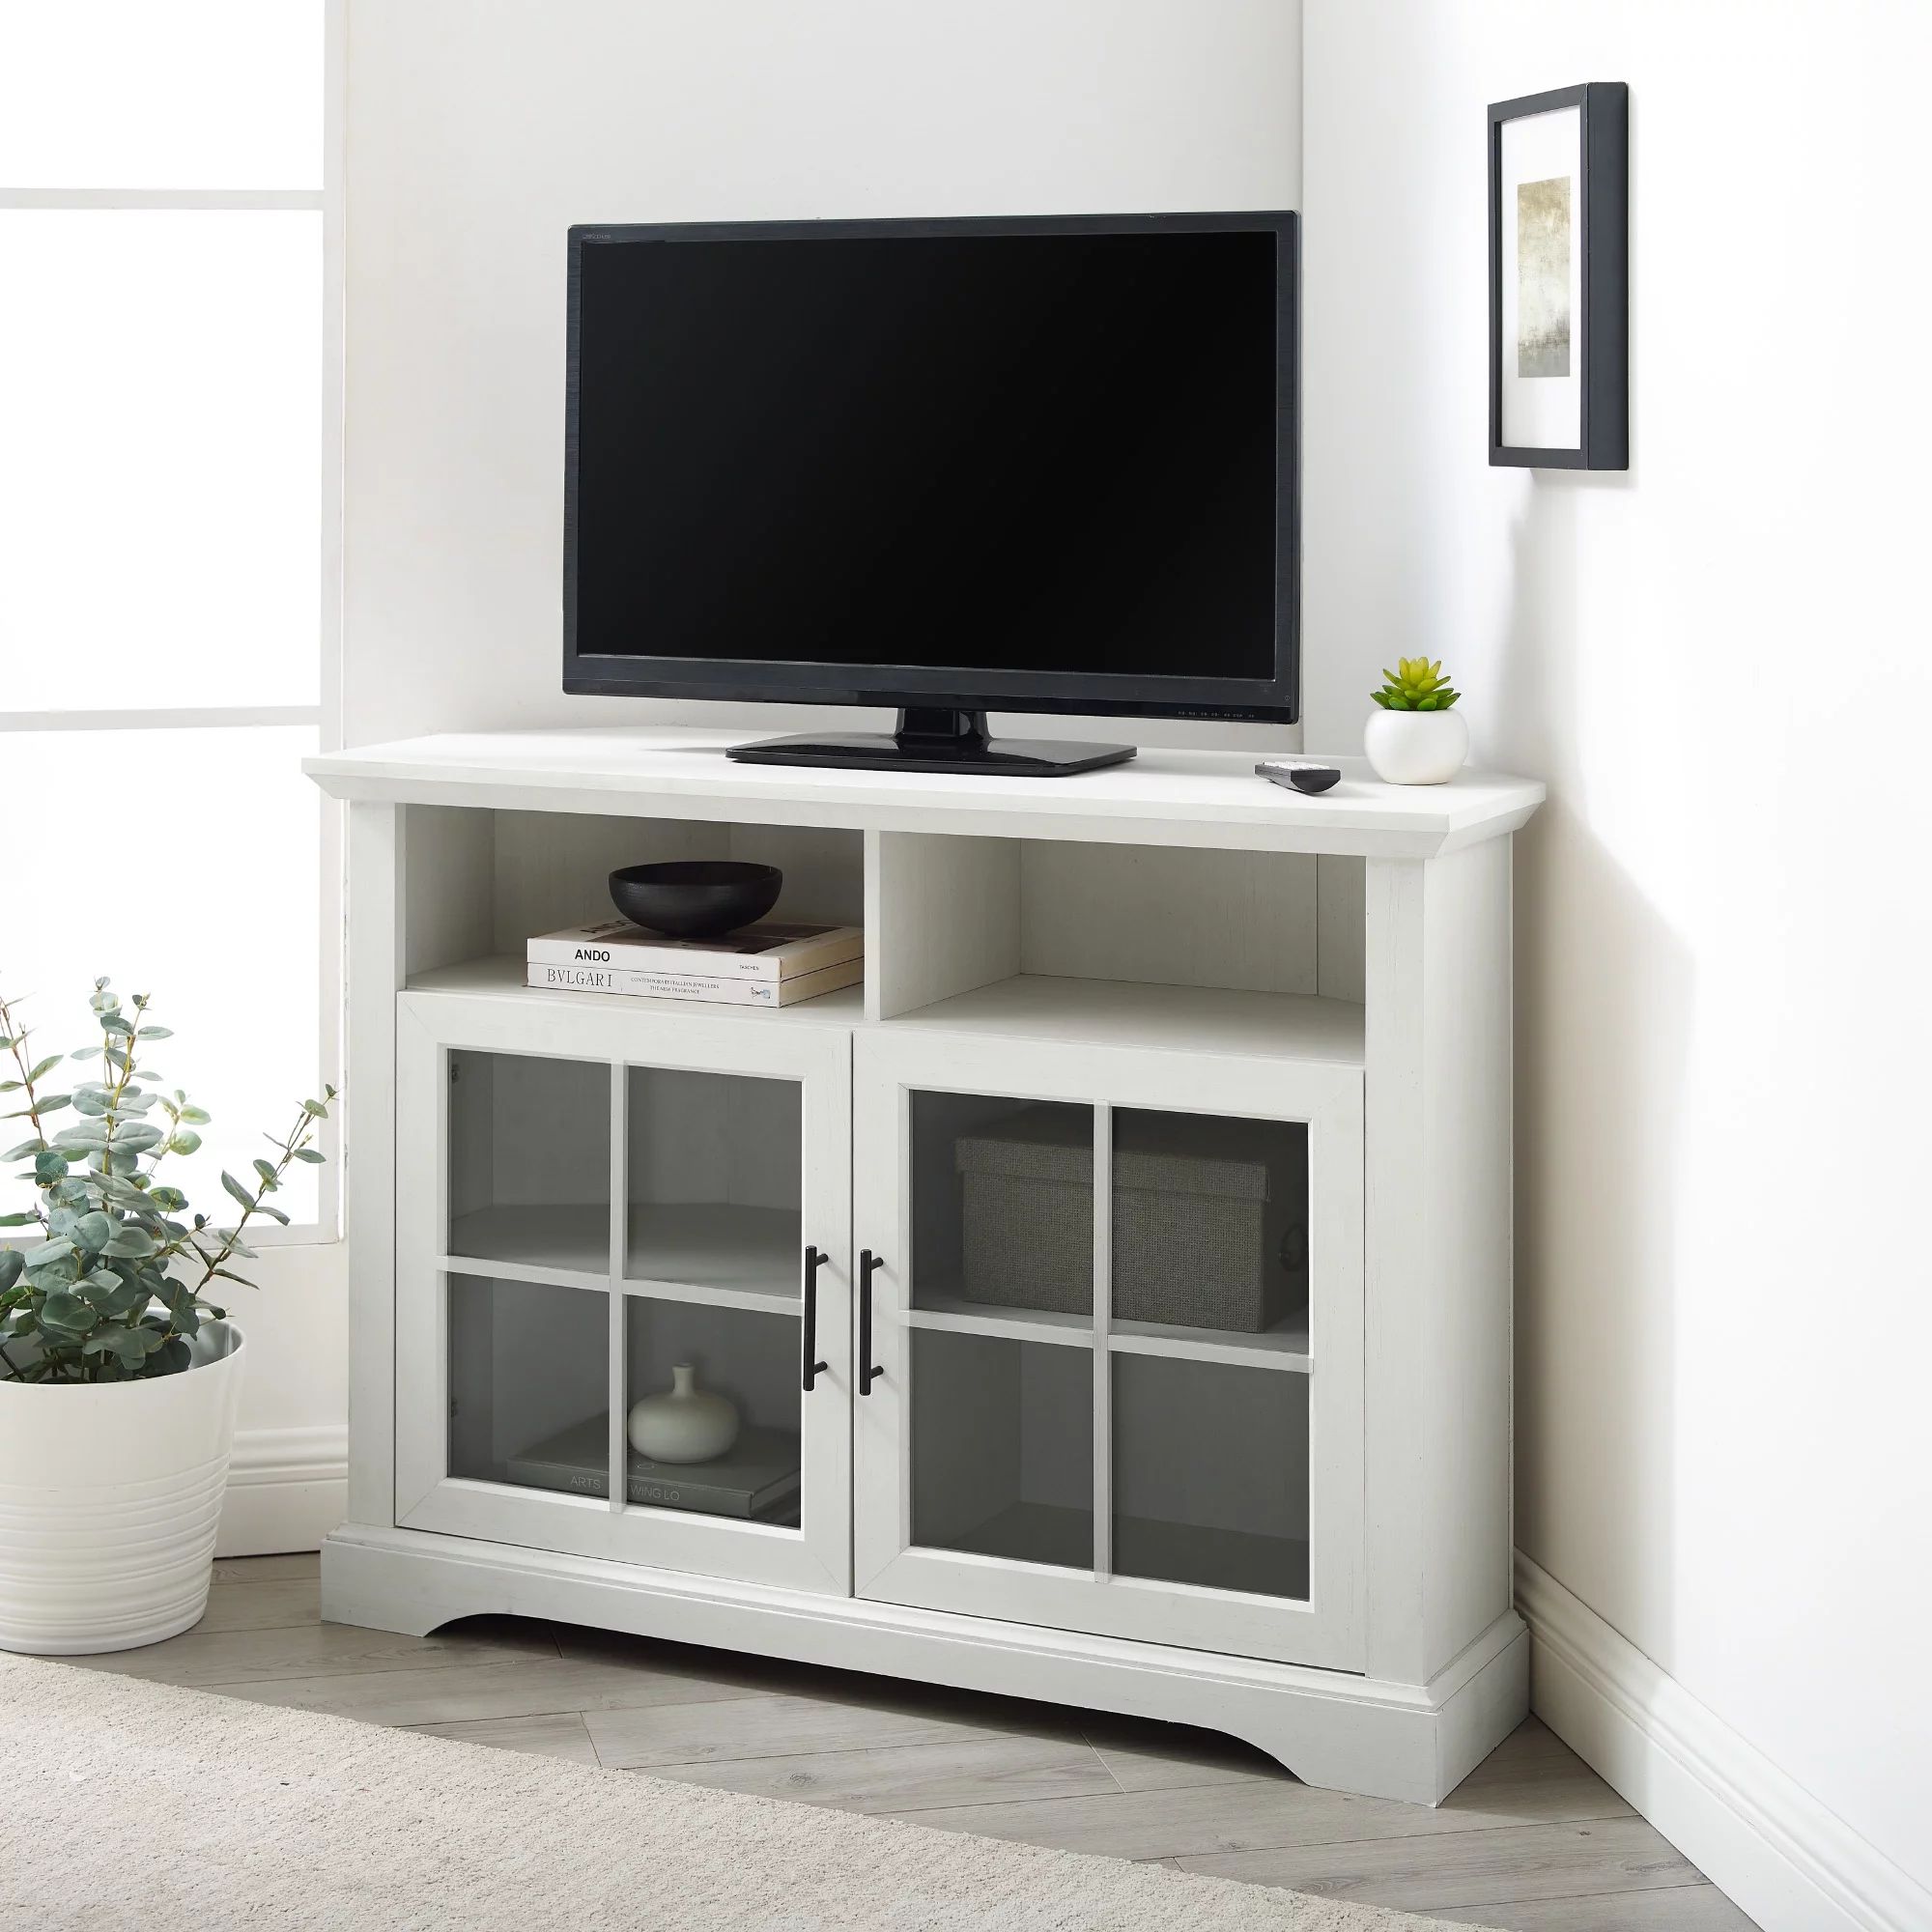 Manor Park Traditional Corner TV Stand for TVs up to 50”, White - Walmart.com | Walmart (US)